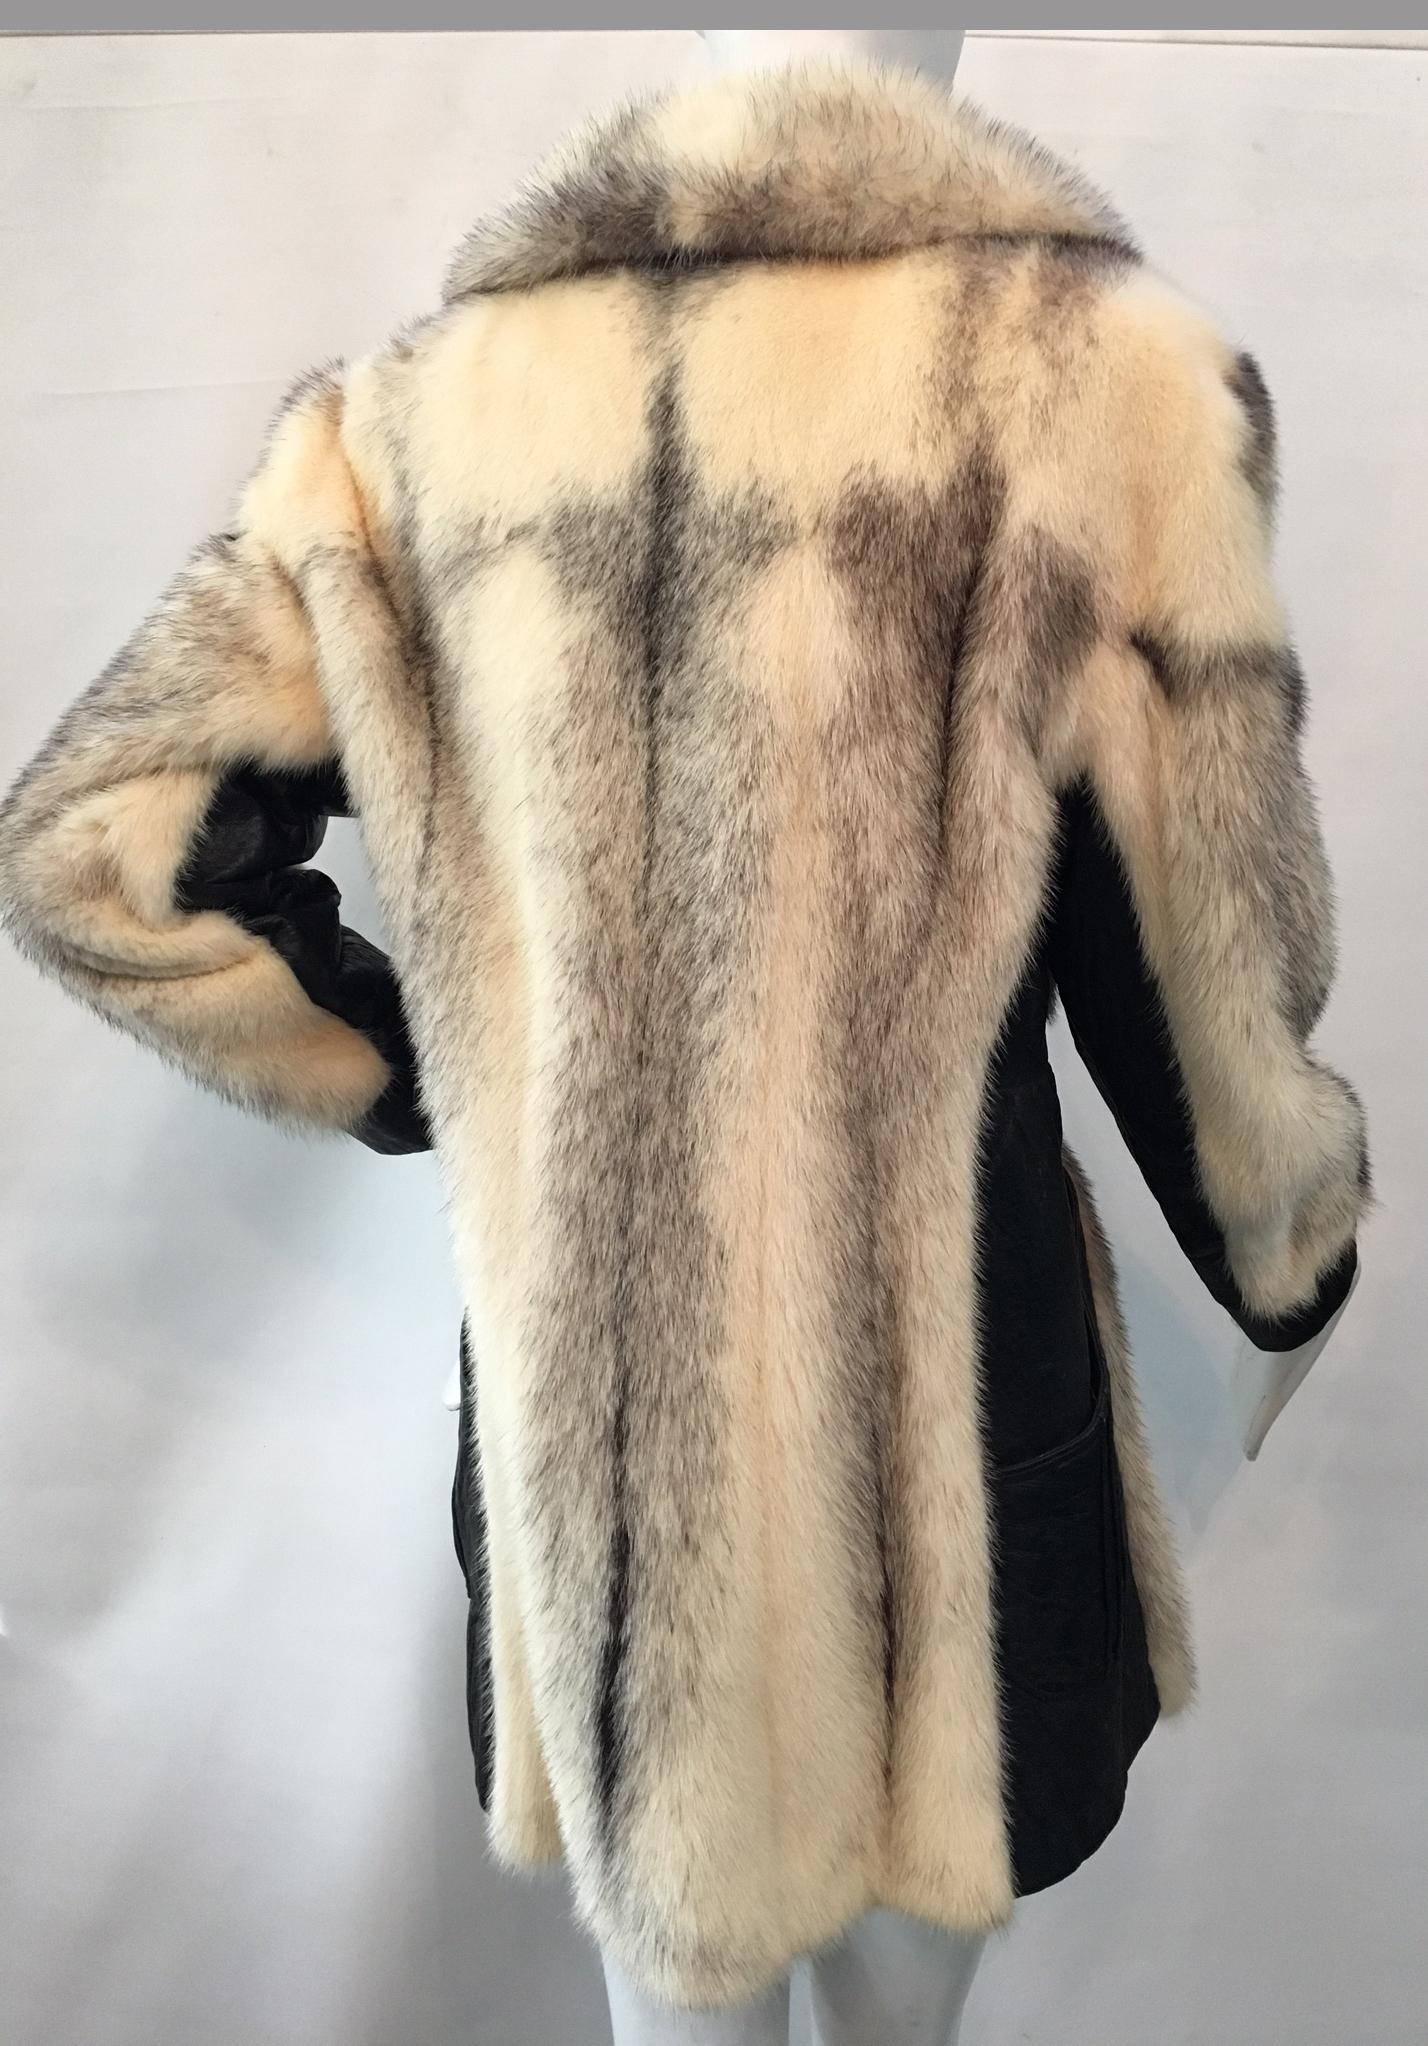 Vintage 1980s fur and leather coat by Juan de Cirota features large fur collar and integrated leather belt.  Excellent vintage condition with only the most minor signs of gentle use.  No size marking.
Approx. measurements:
Bust: 18